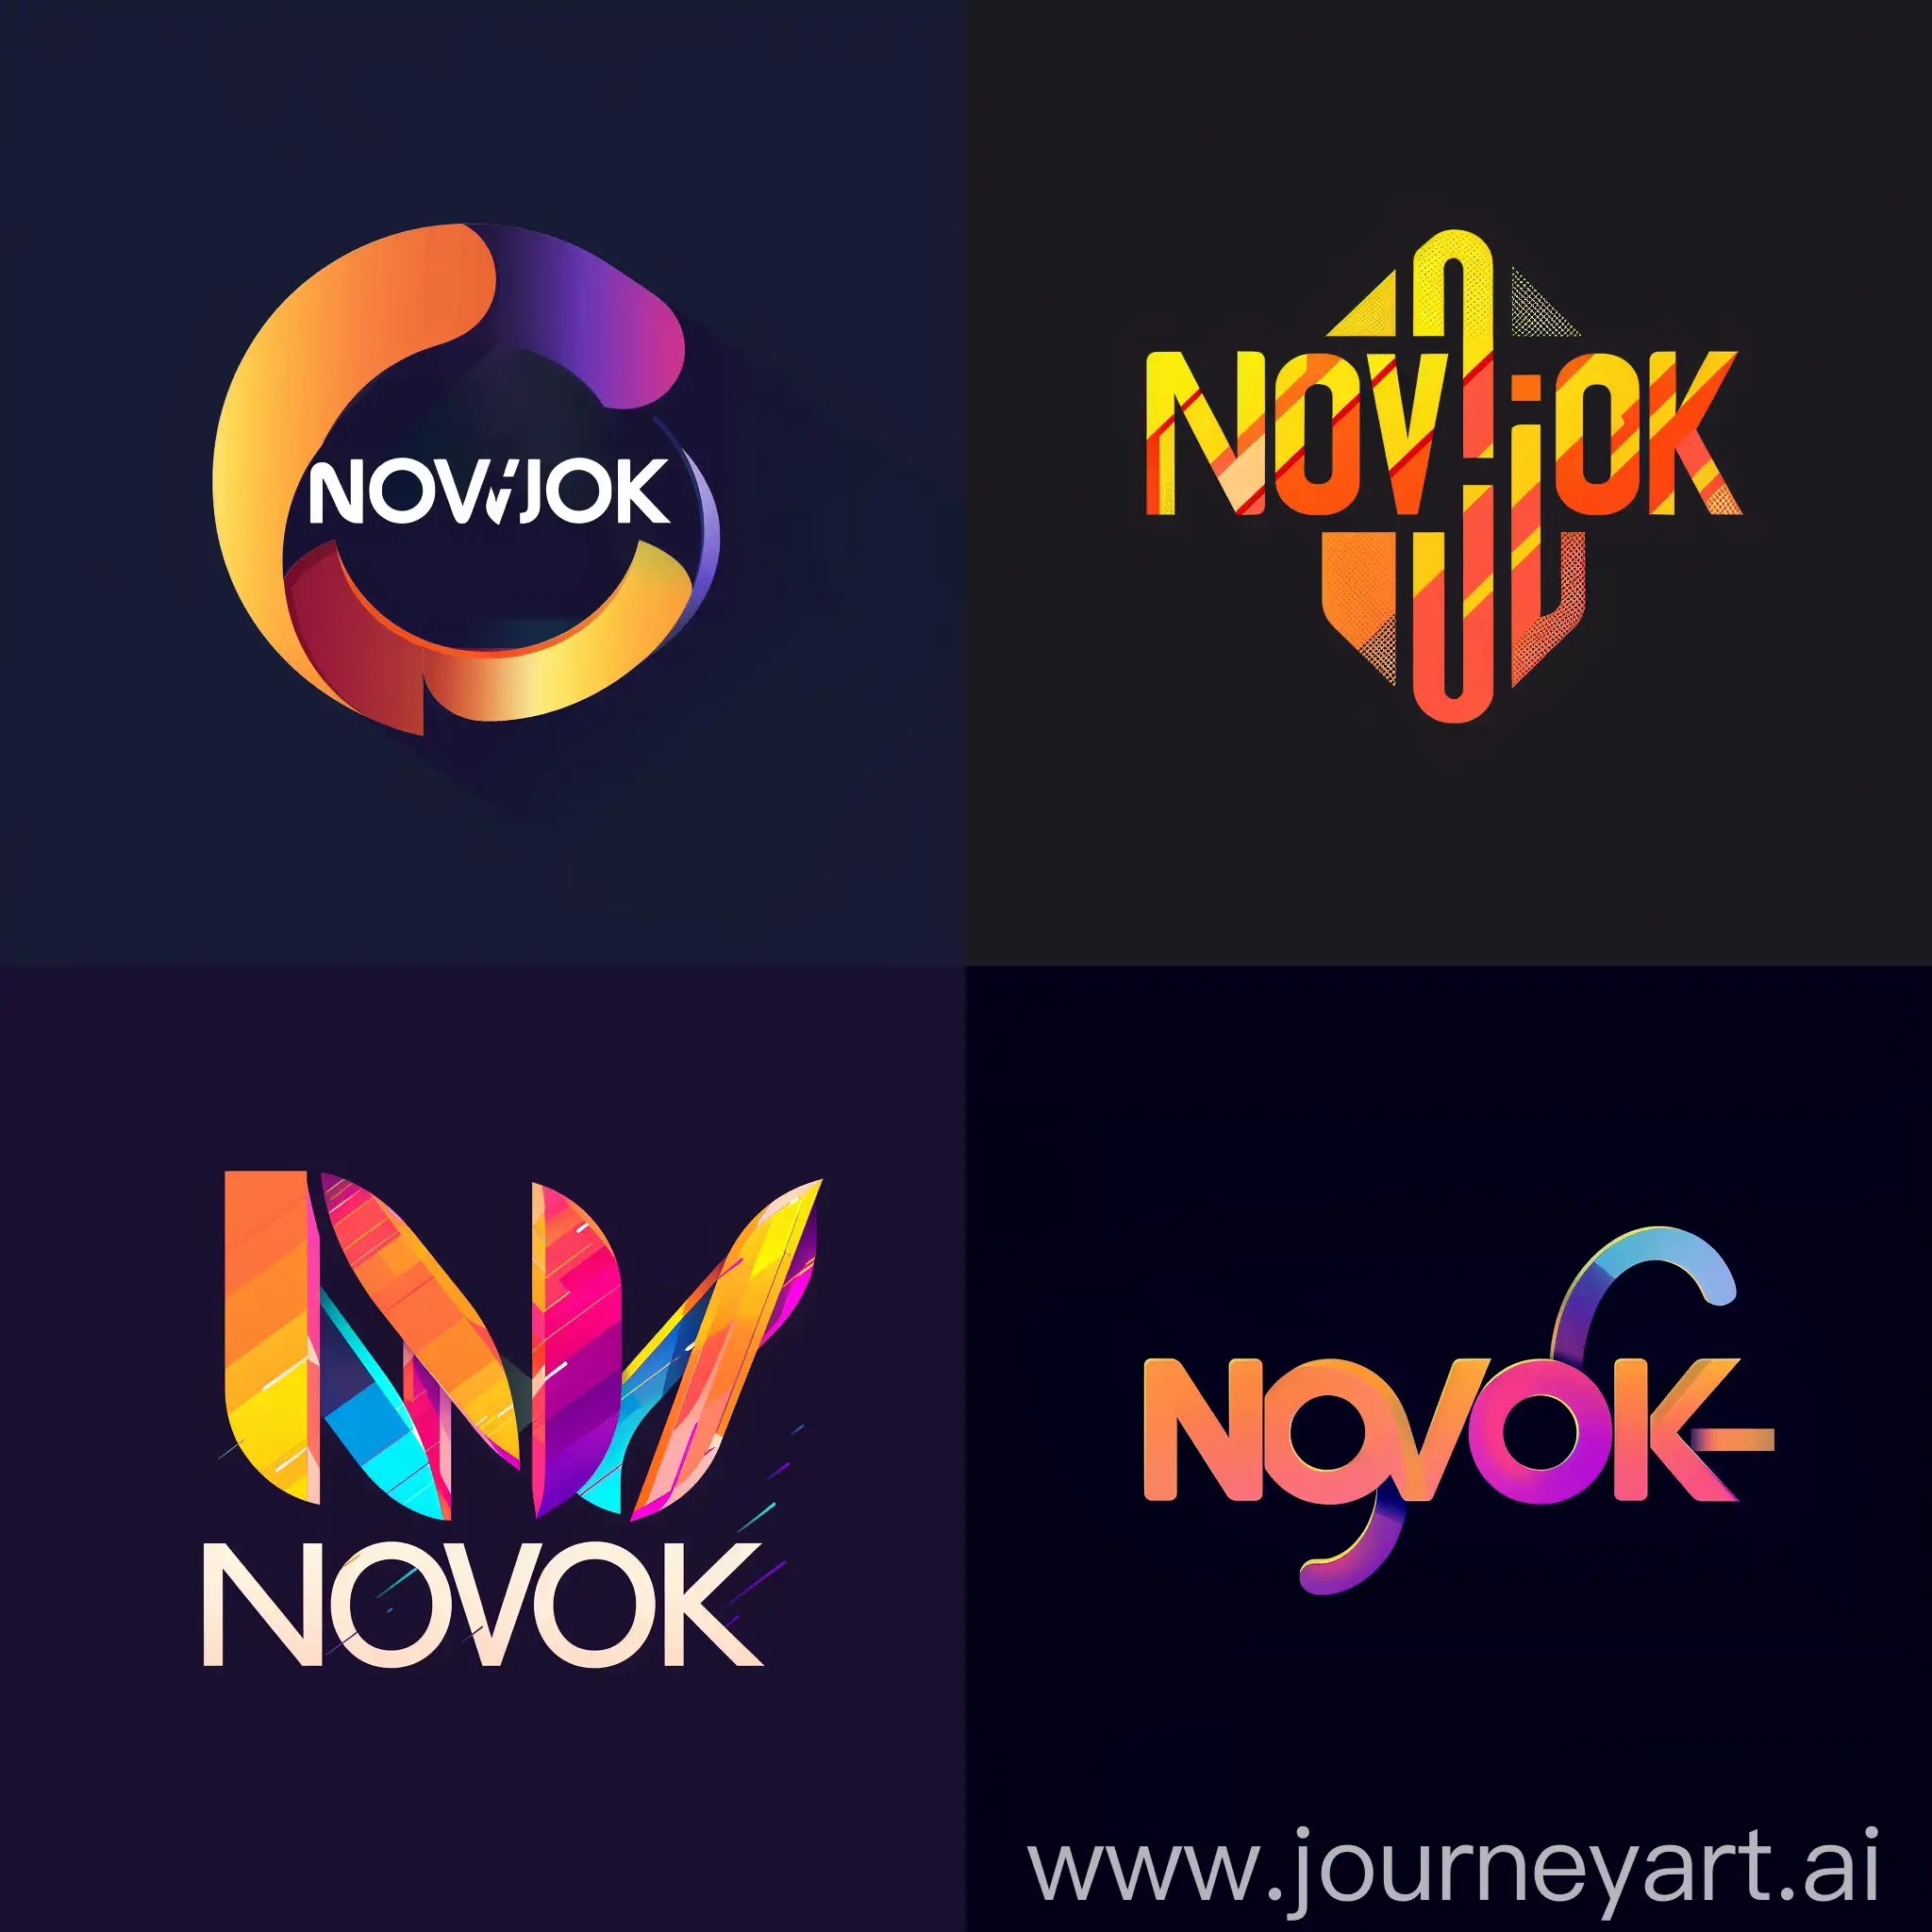 Beautiful logo with text "NovichOK". Logo for channel about Data Science and Nachine Learning